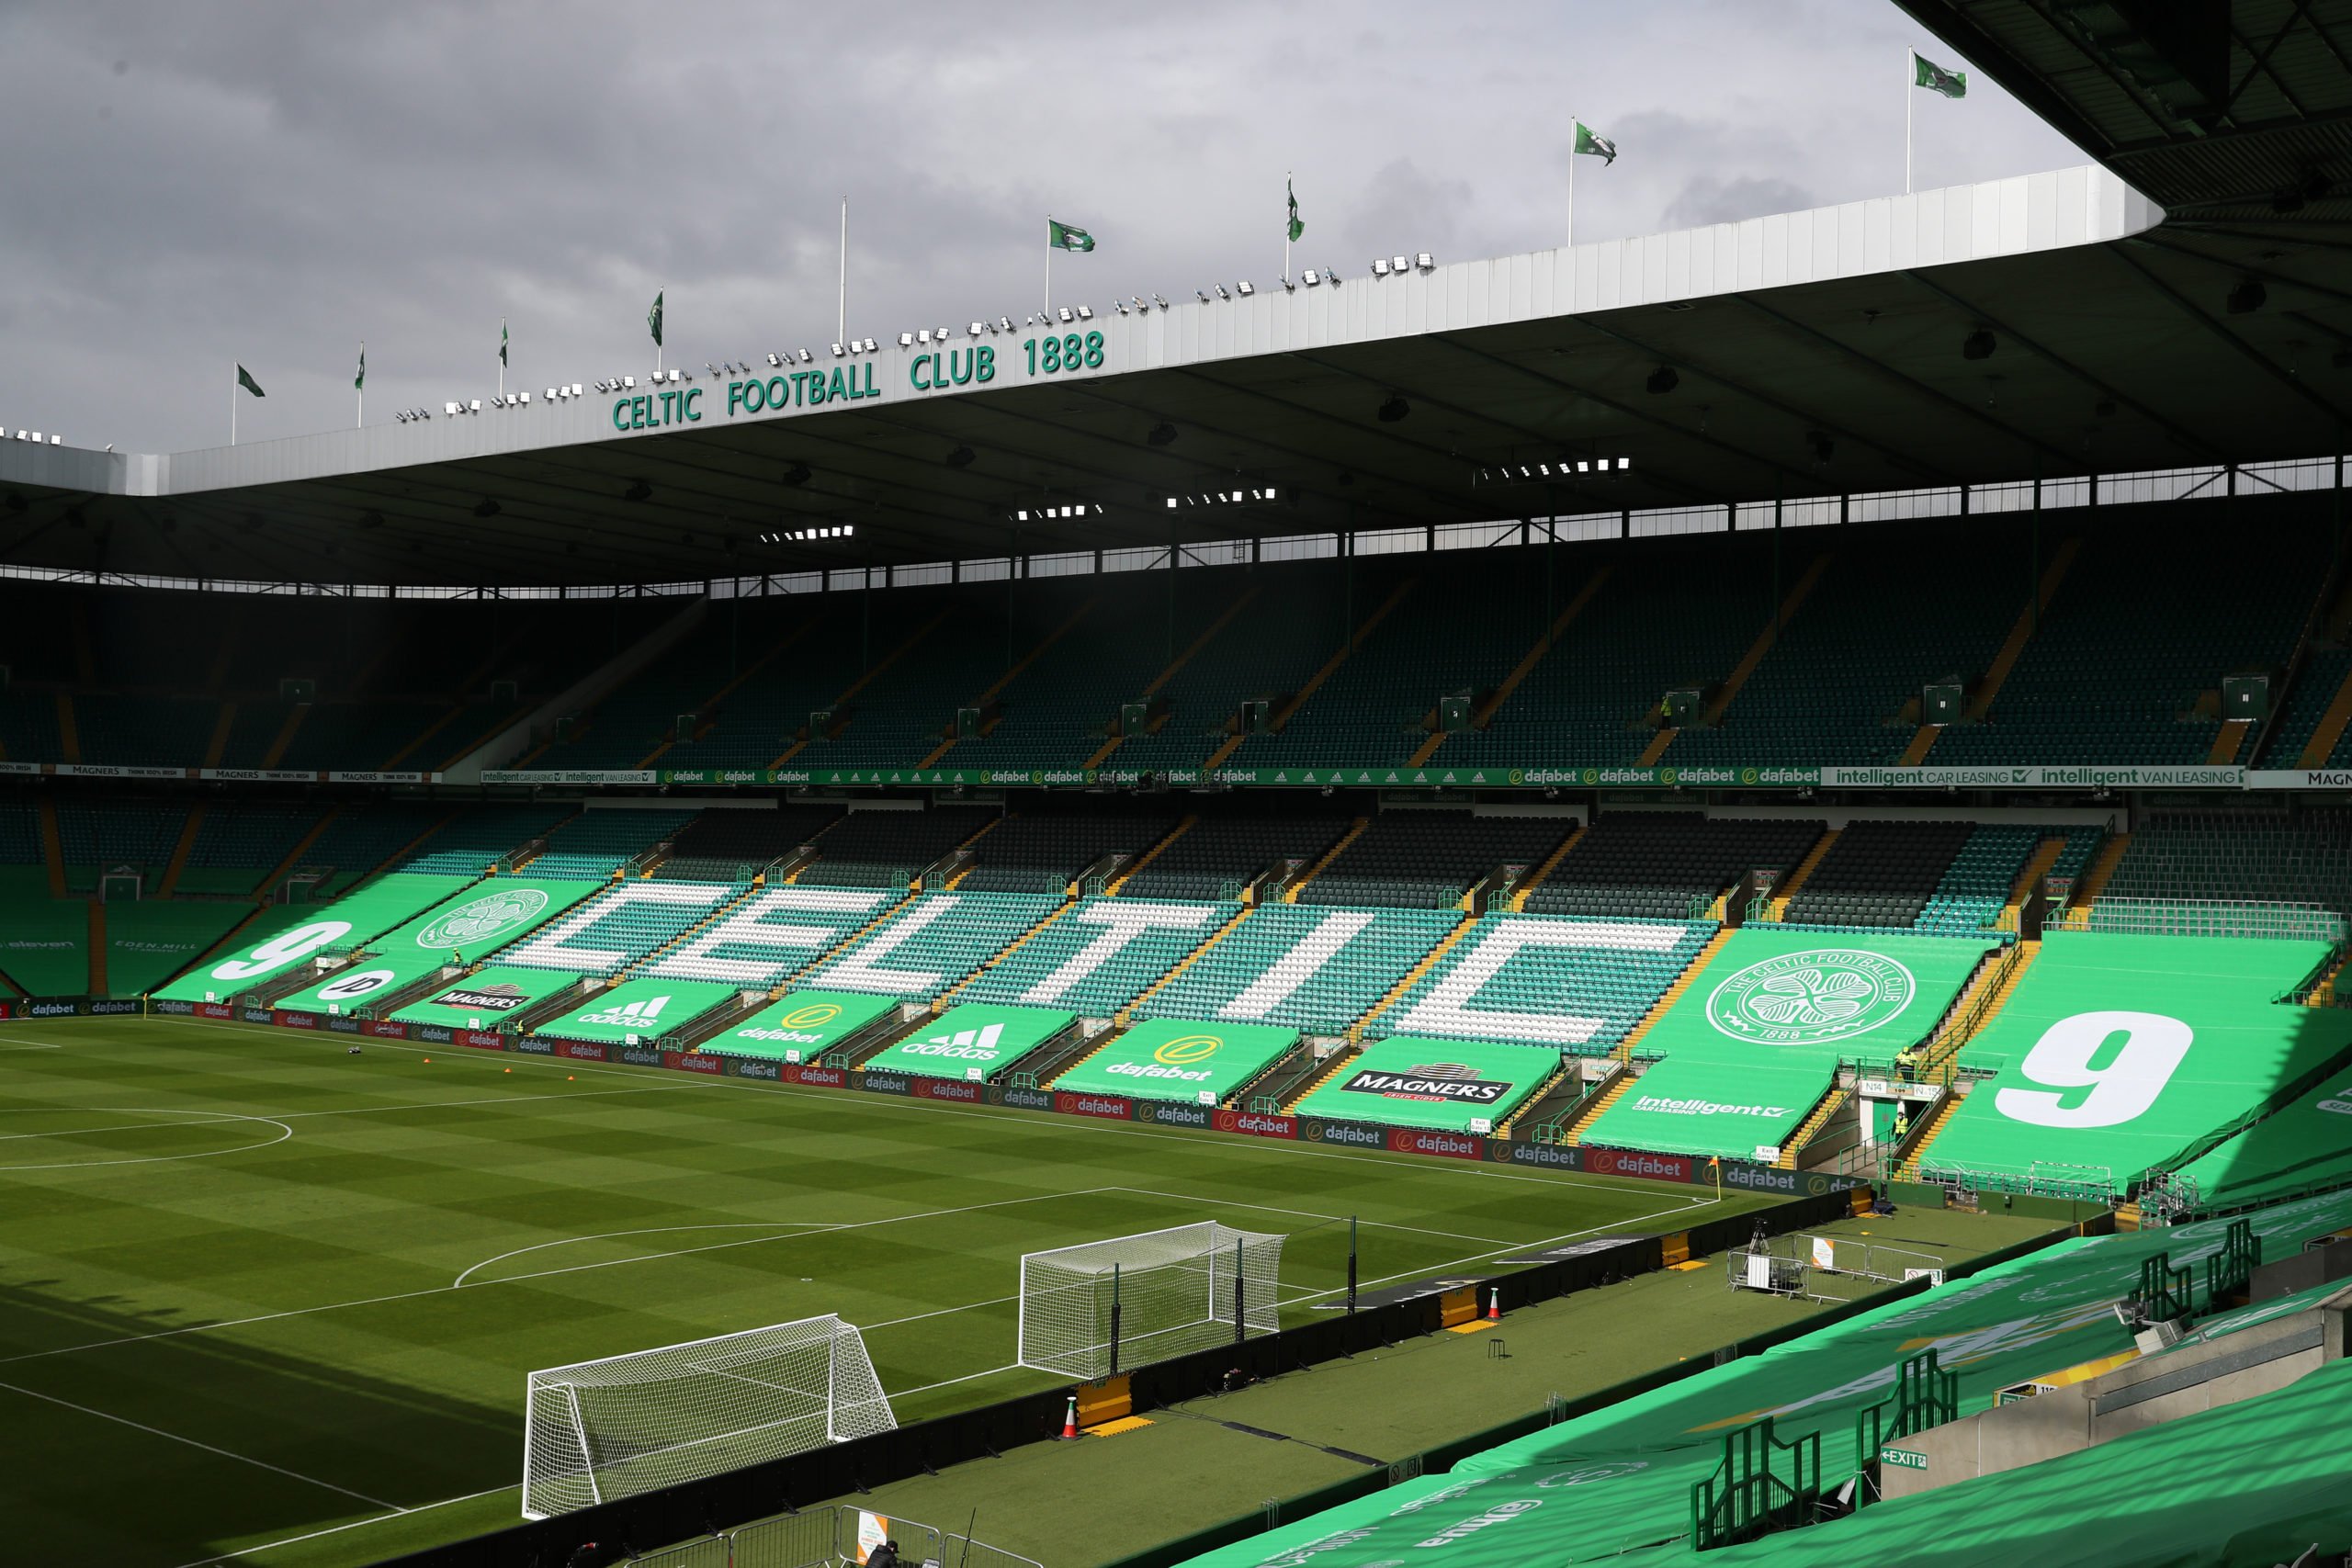 Celtic channel gets update on the new year review from club chairman